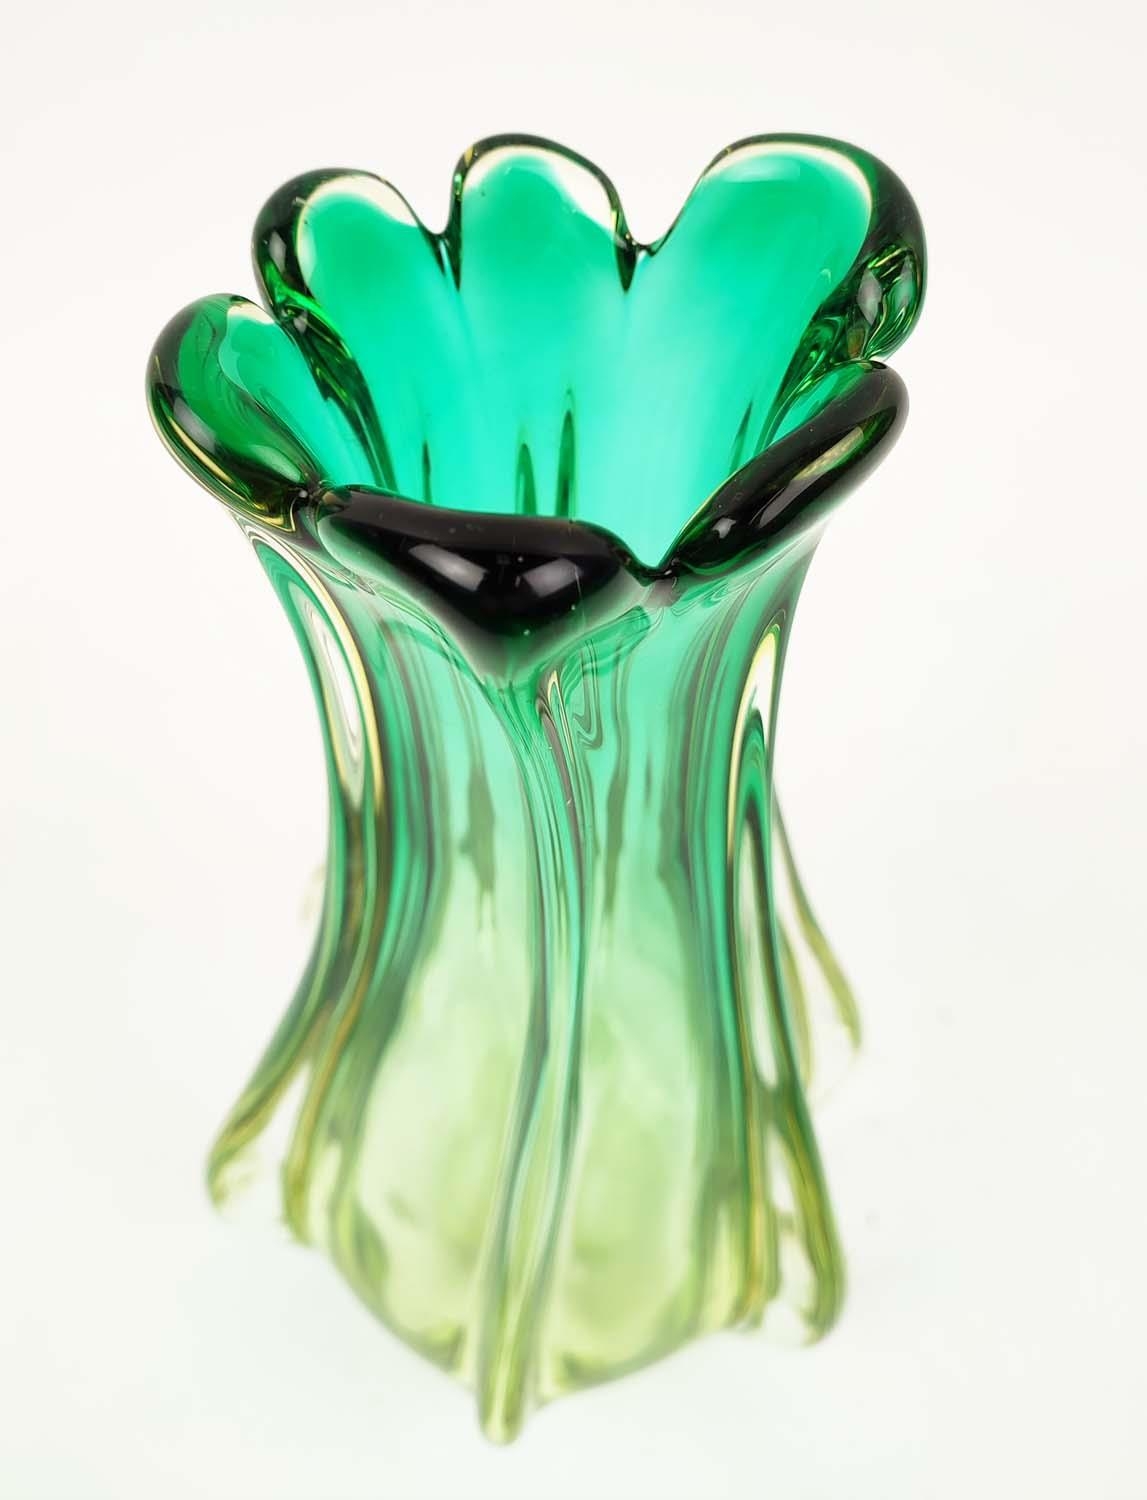 MURANO GLASS VASE, late 20th century, in green and lime green colourway, of lobed waisted form, 28cm - Image 5 of 8